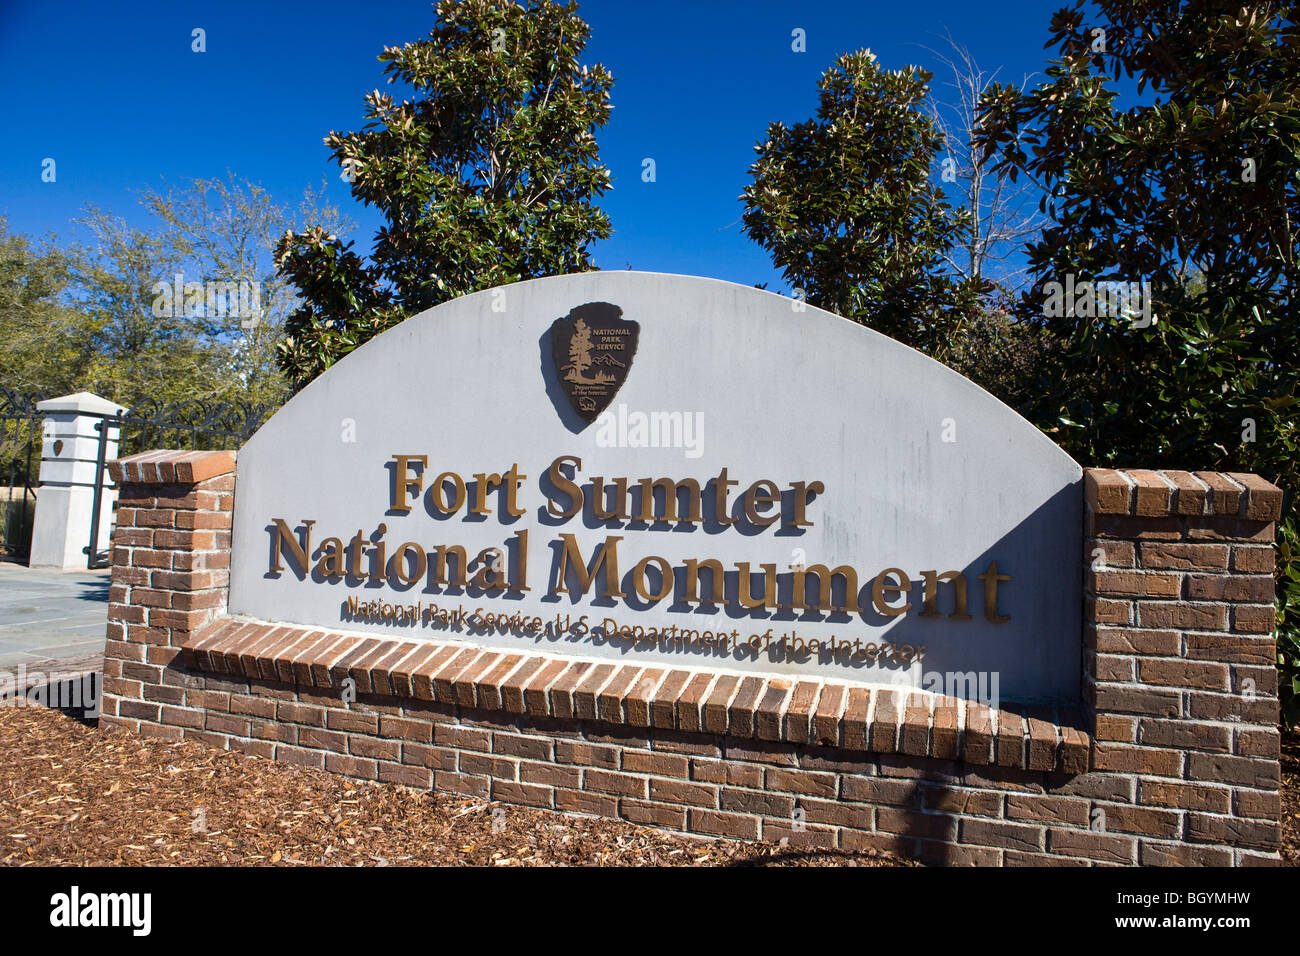 National Park Service welcome sign to Fort Sumter National Monument, Charleston, South Carolina, United States of America. Stock Photo